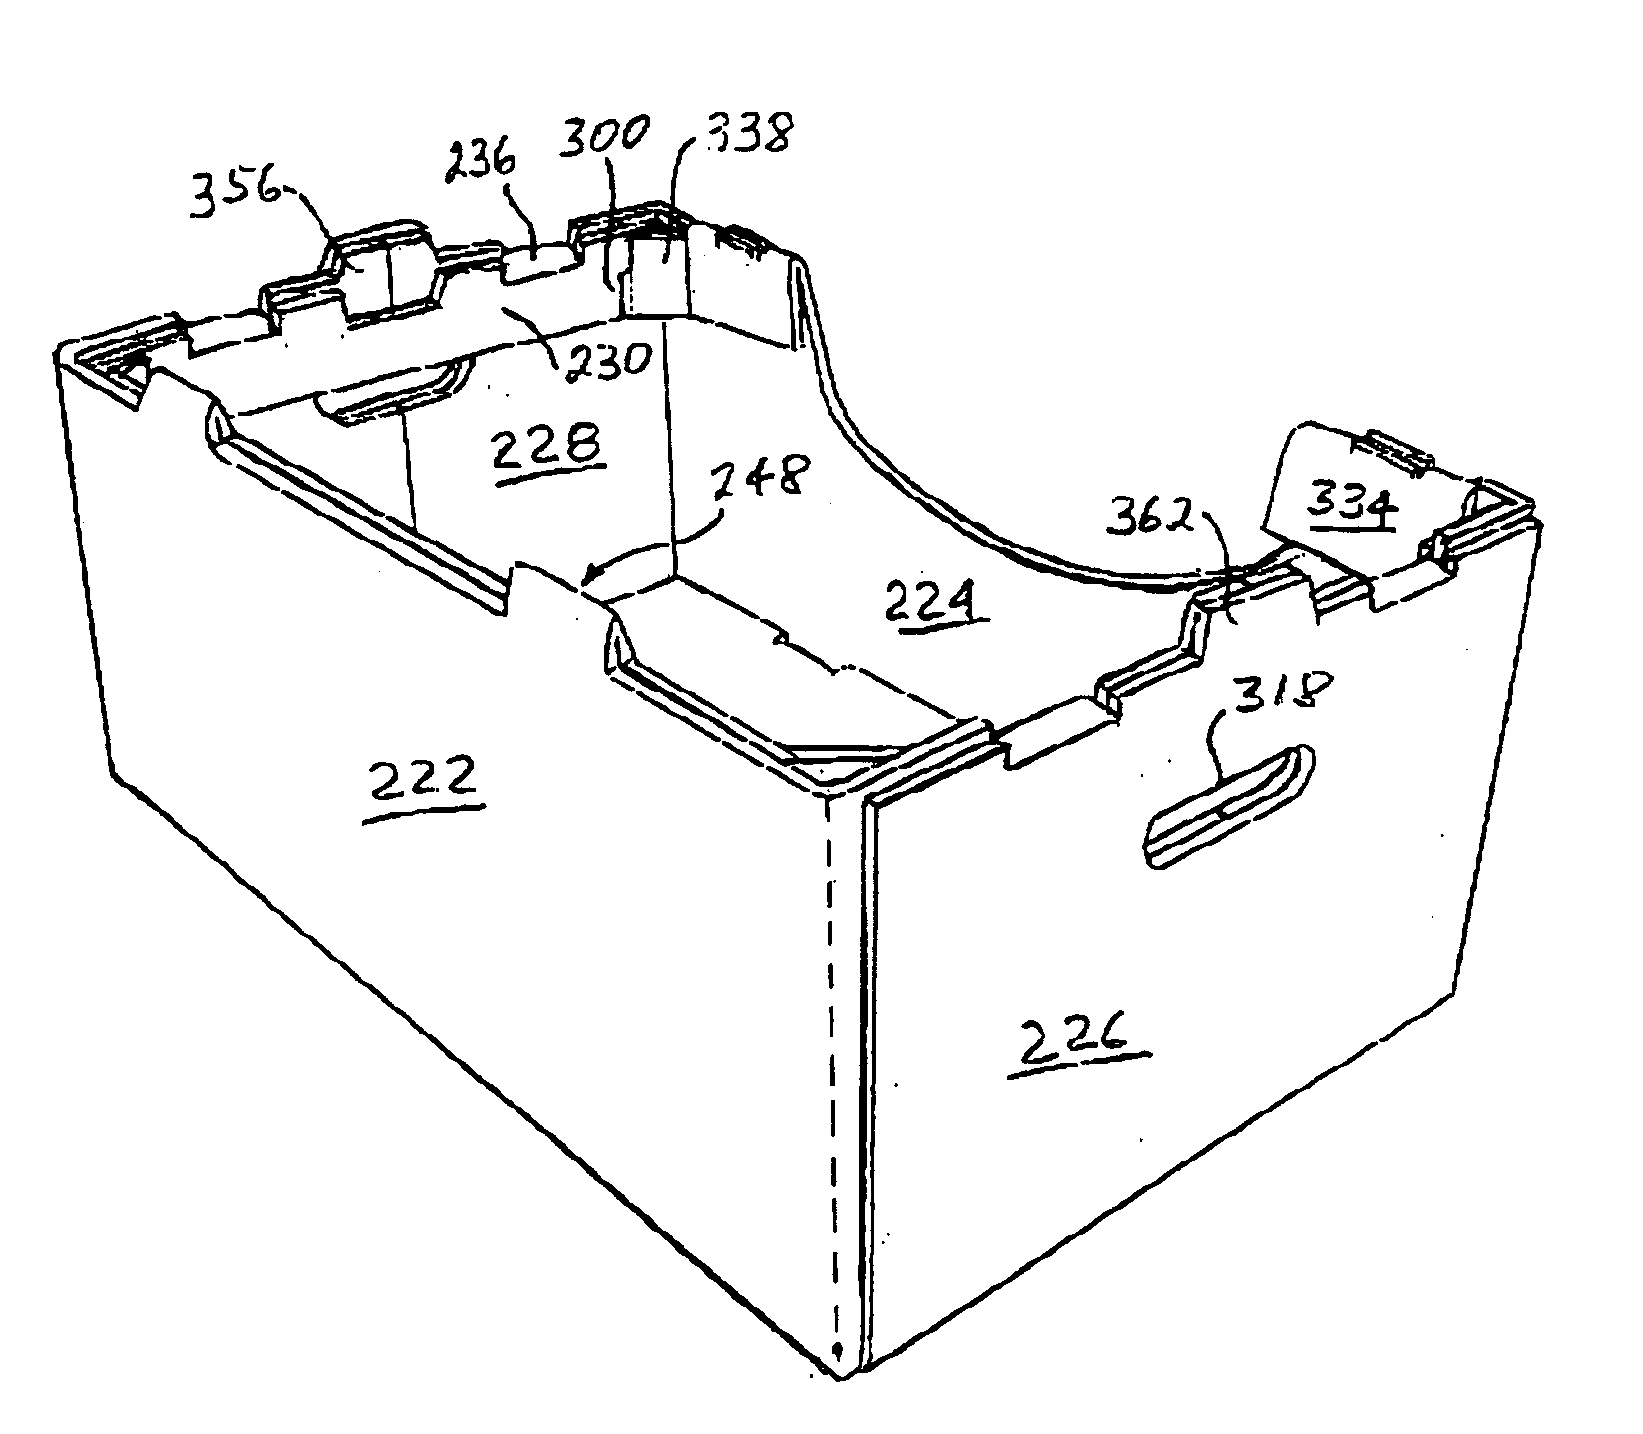 Self-locking stackable tapered container with partial top stucture